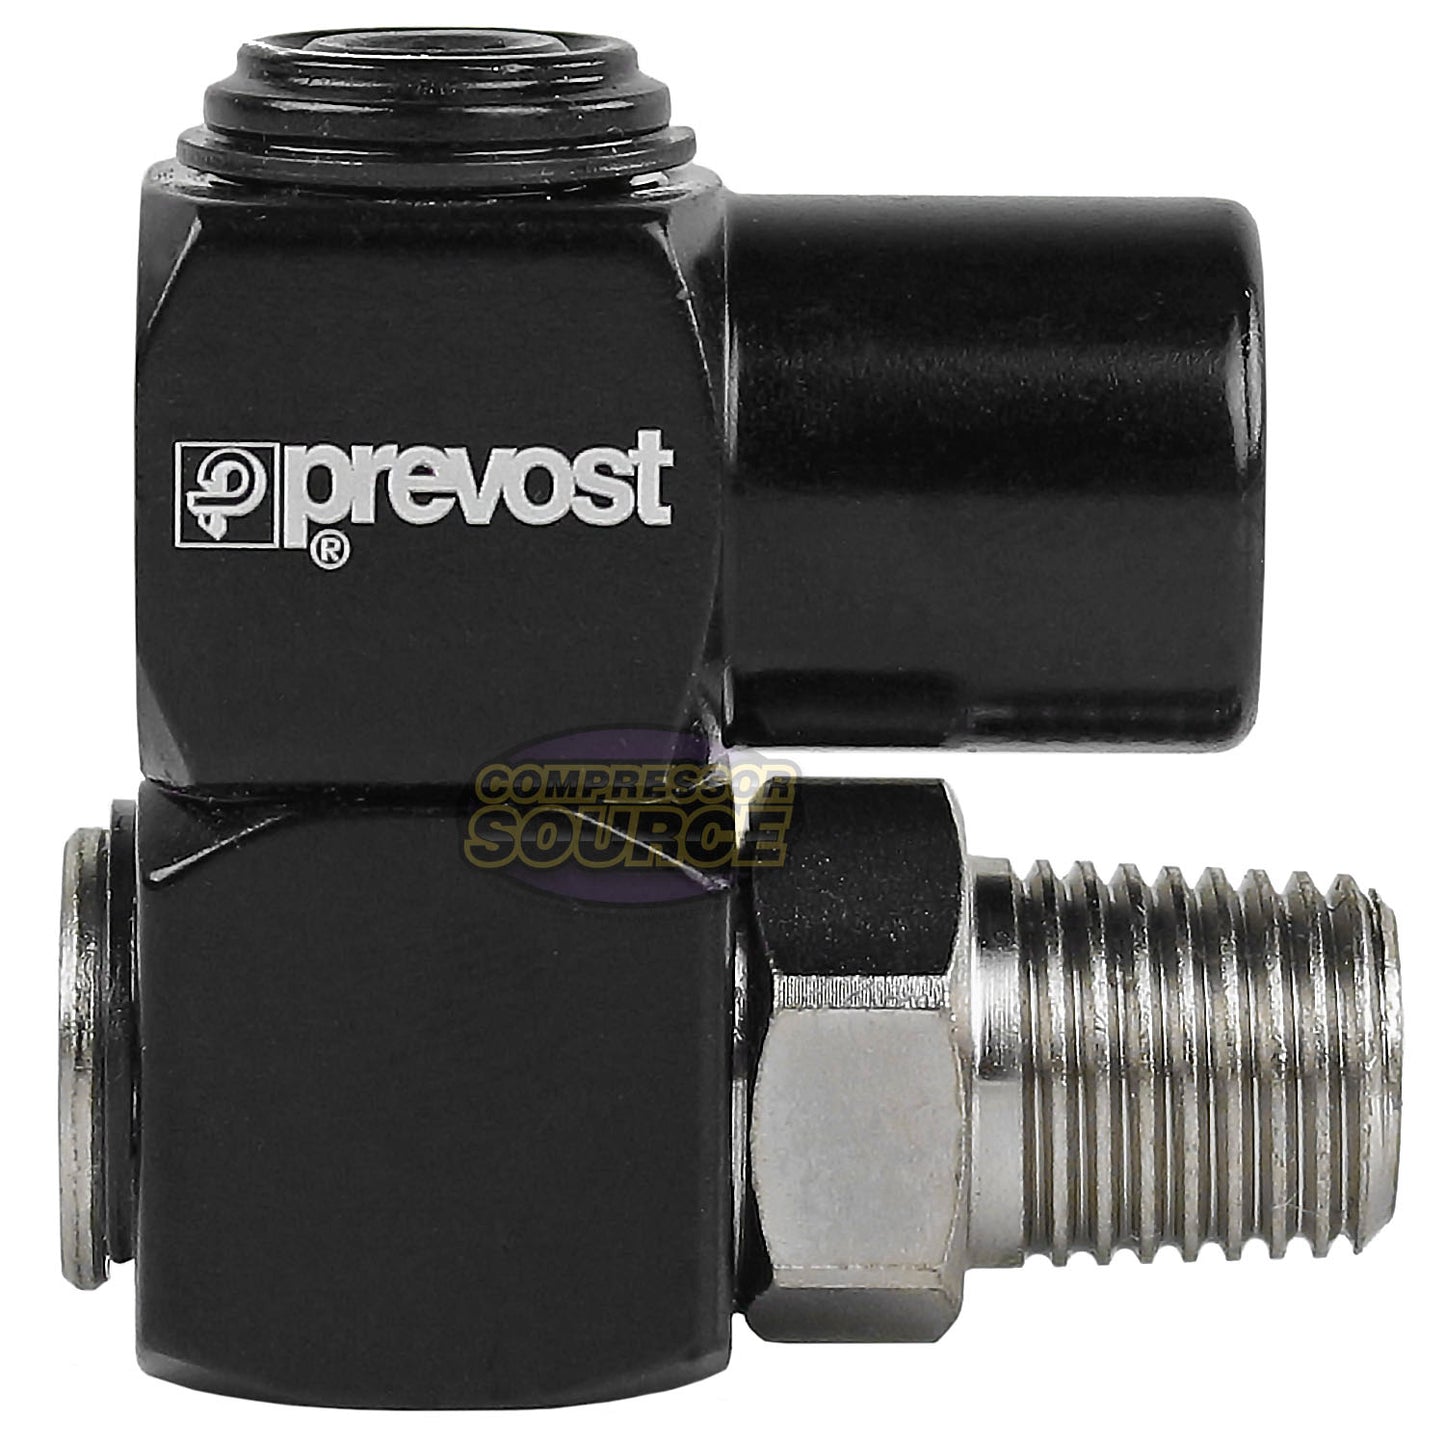 2 Prevost Universal 360 1/4" NPT Compressed Air Flow Tool Hose Connection Swivel